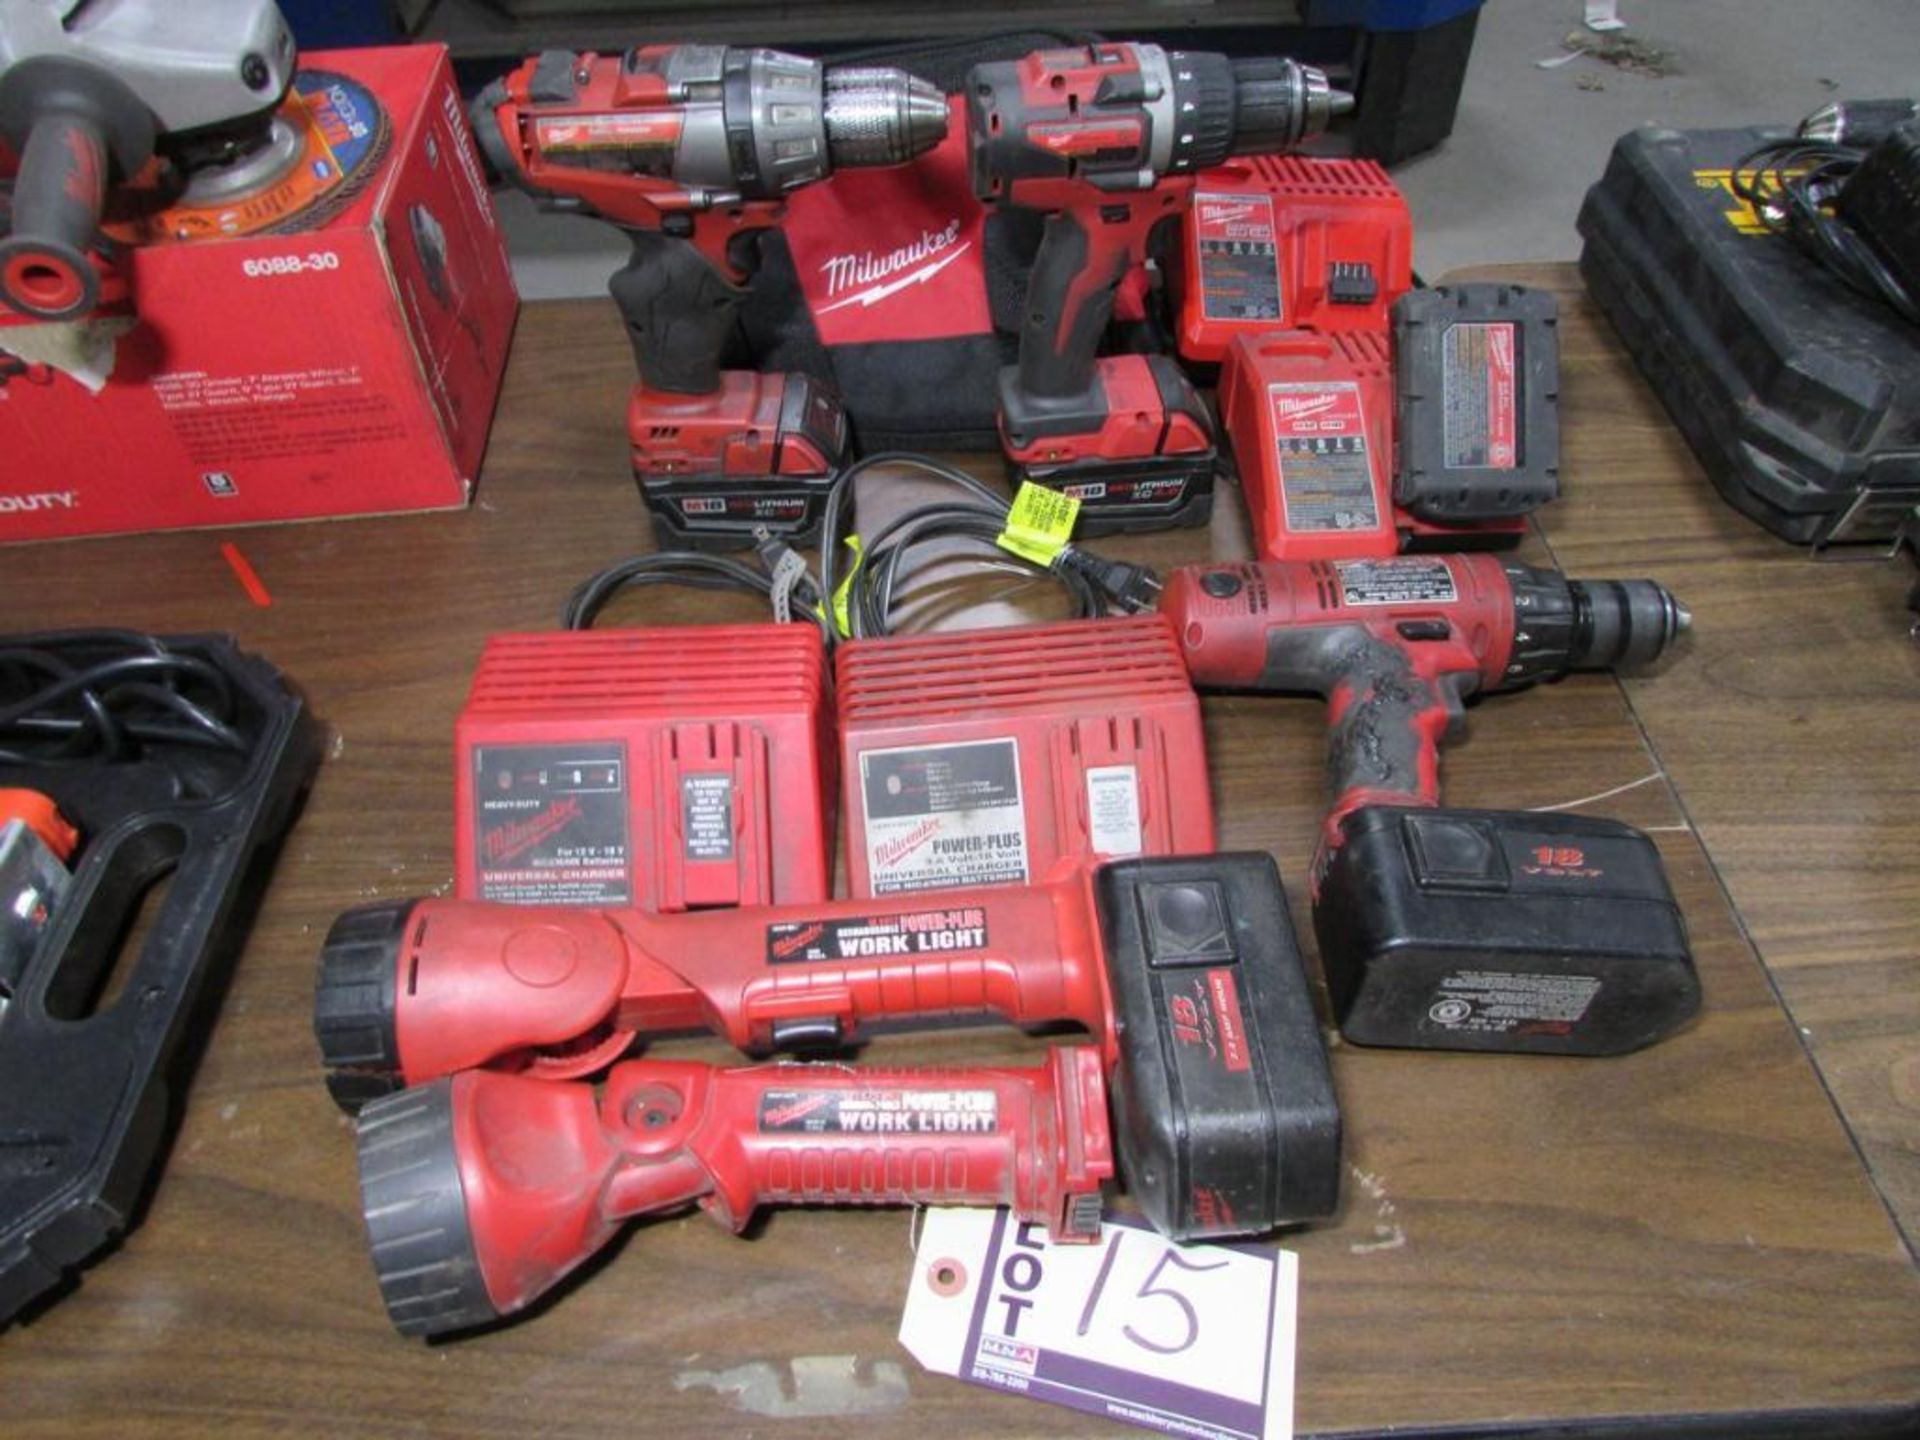 Assorted Milwaukee Electric Power Tools: (1) Cat. No. 2603-20 1/2" Drill/Driver, (1) Cat. No. 2801-2